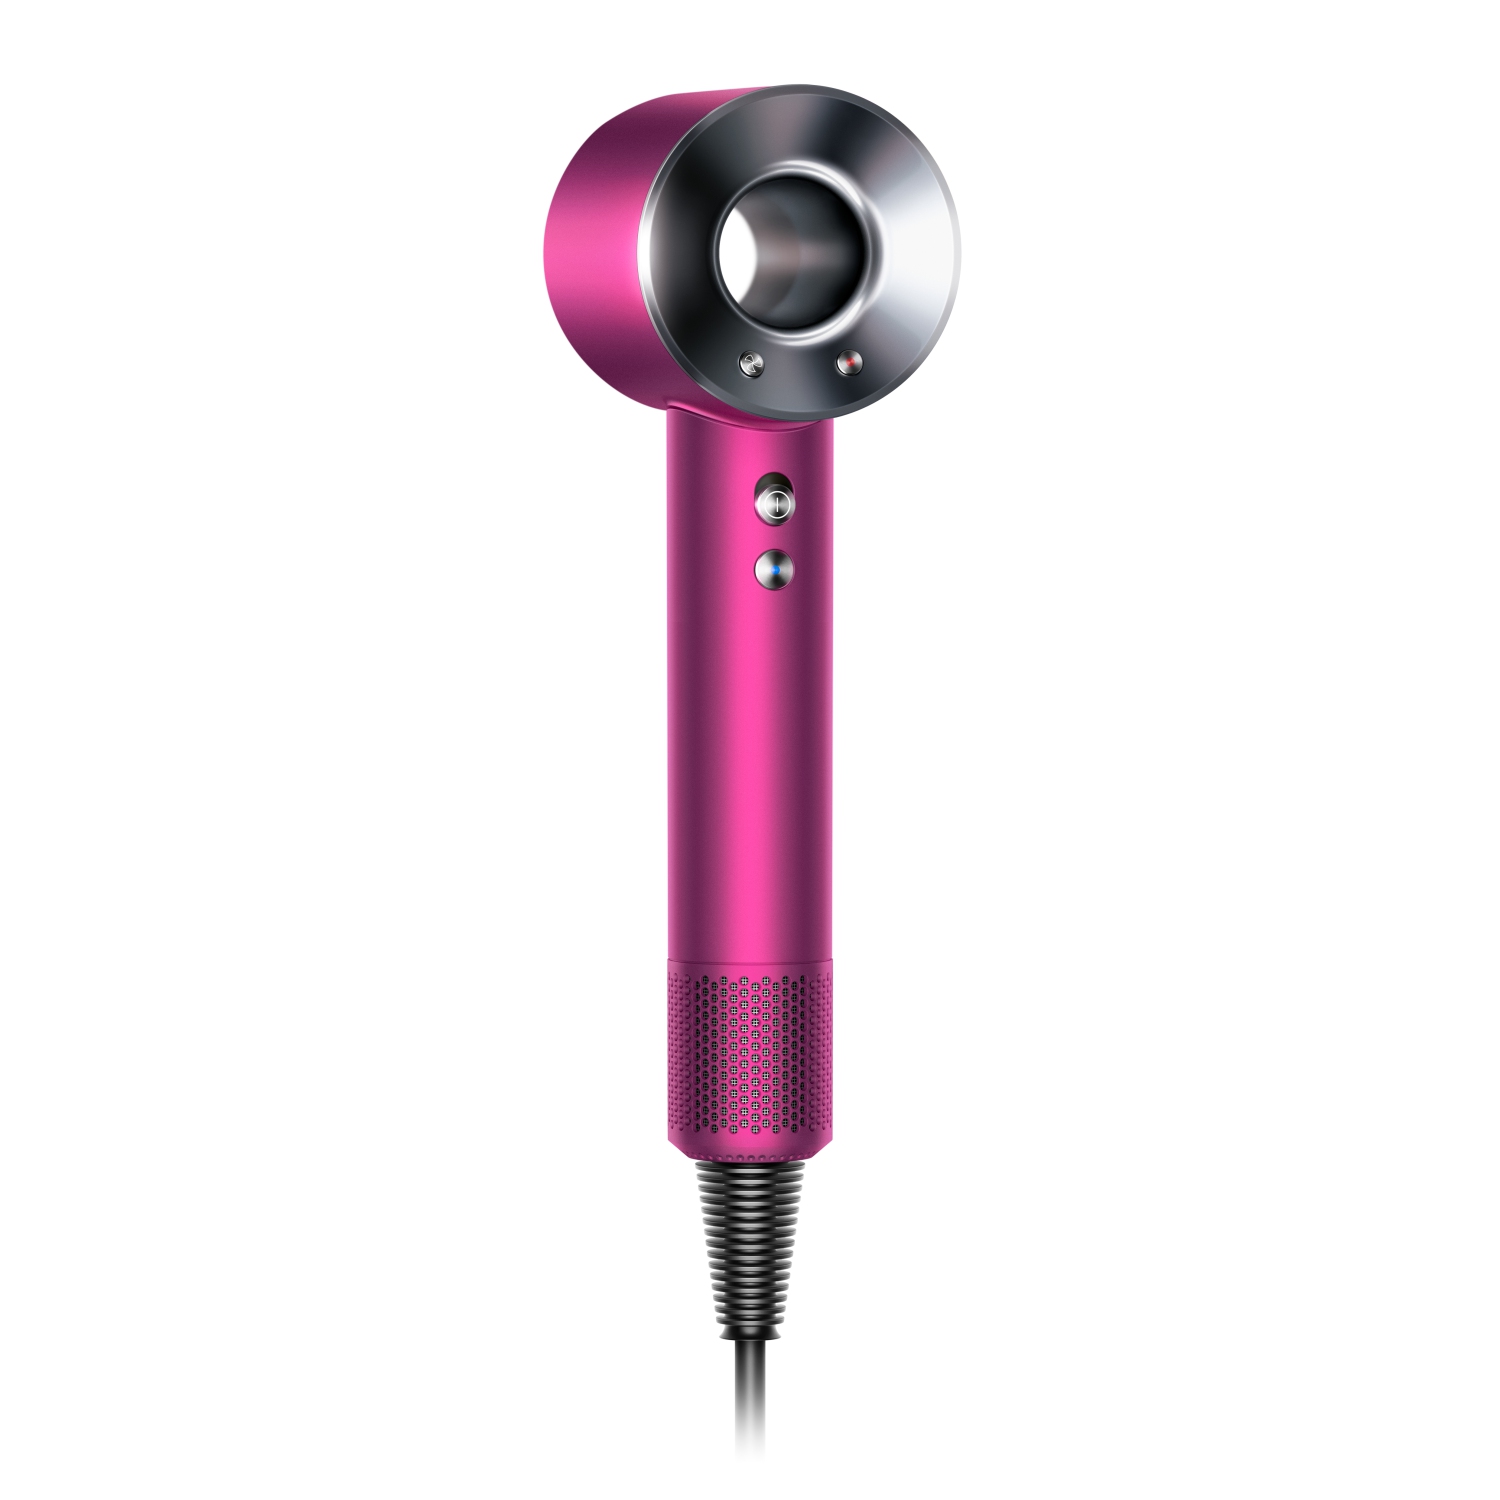 Refurbished (Excellent) - Refurbished (Excellent) Dyson Official Outlet - Supersonic Hair Dryer, Fuchsia